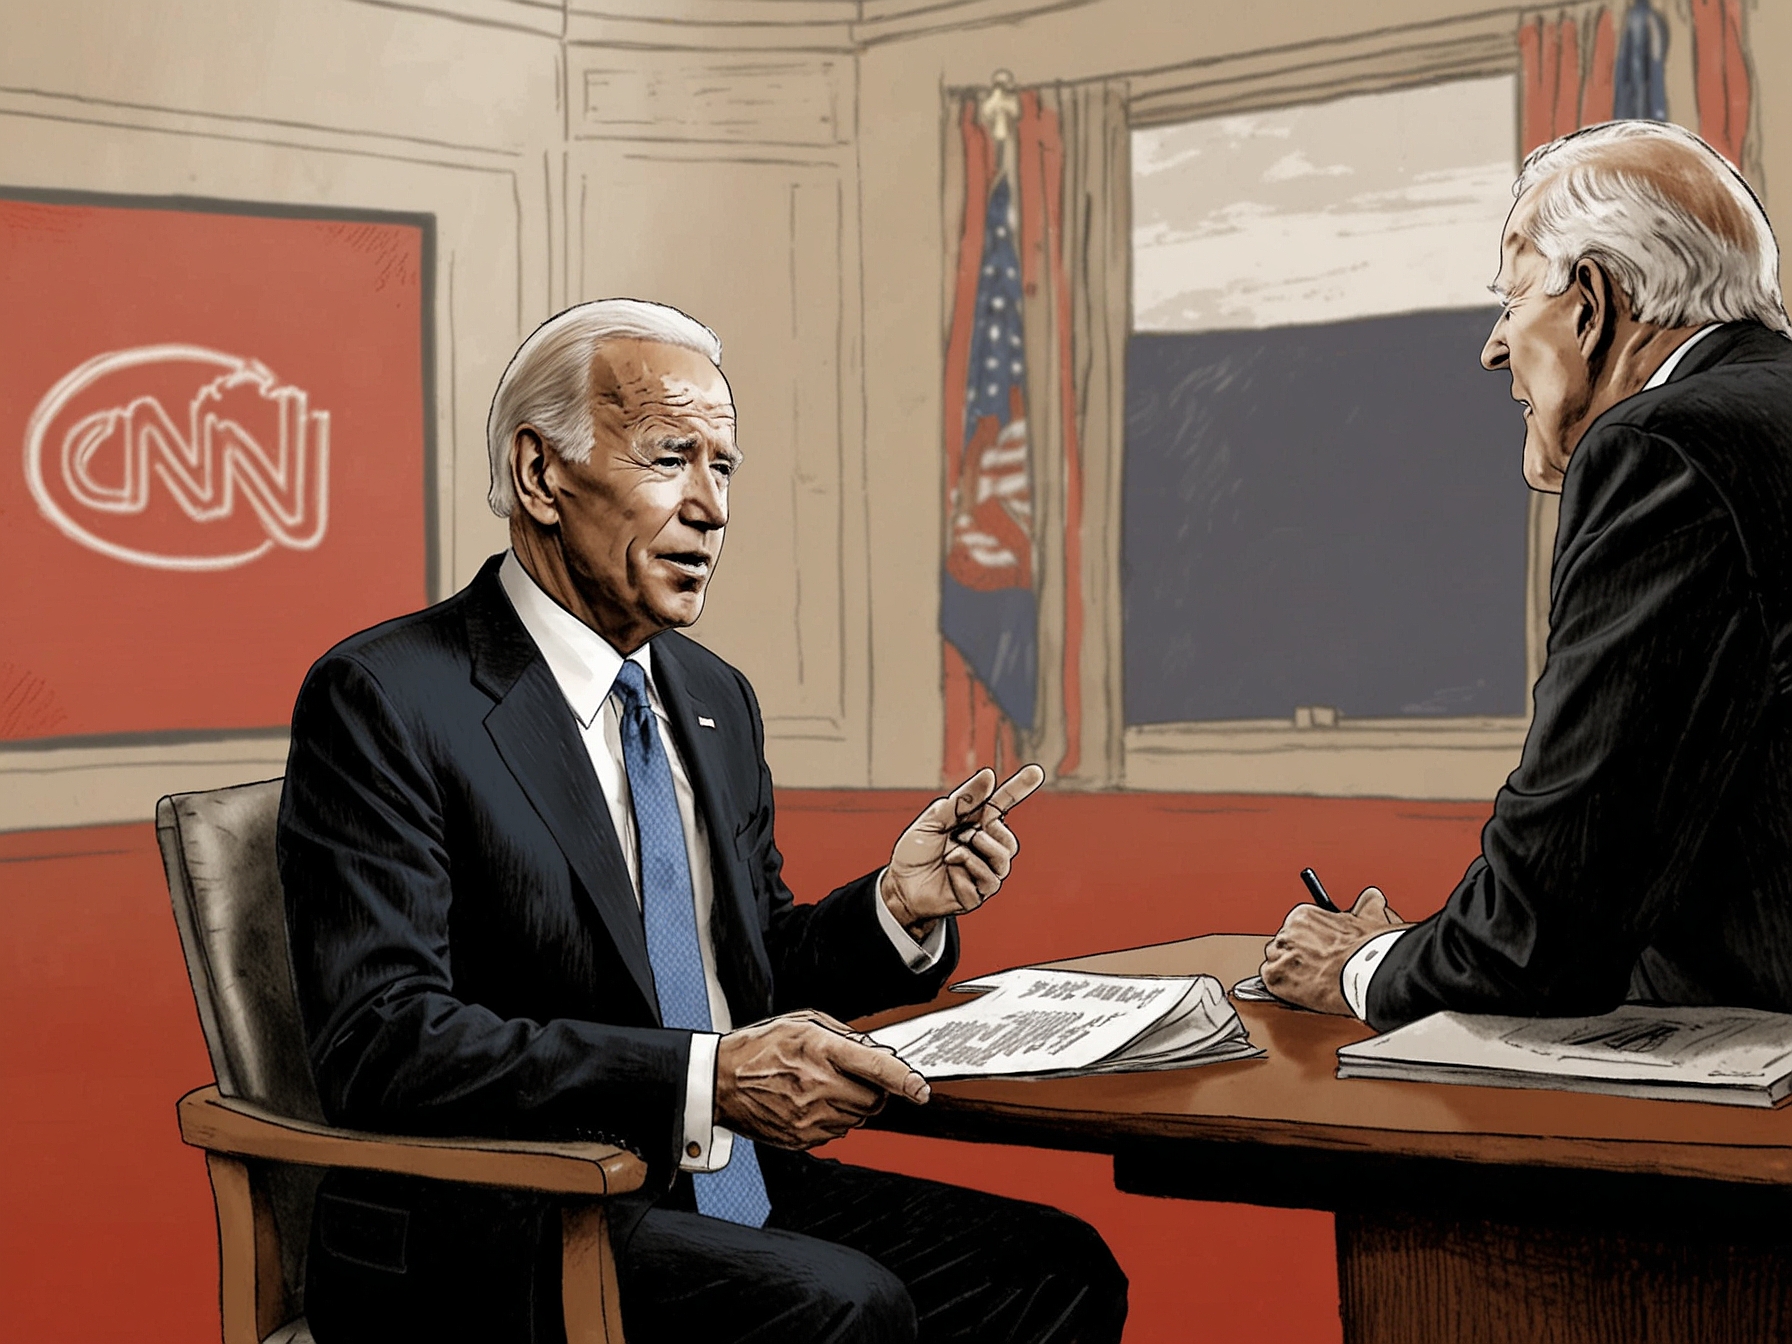 Image of CNN host interviewing Biden Campaign Co-Chair, highlighting the tight race between Biden and Trump despite Trump's legal woes.